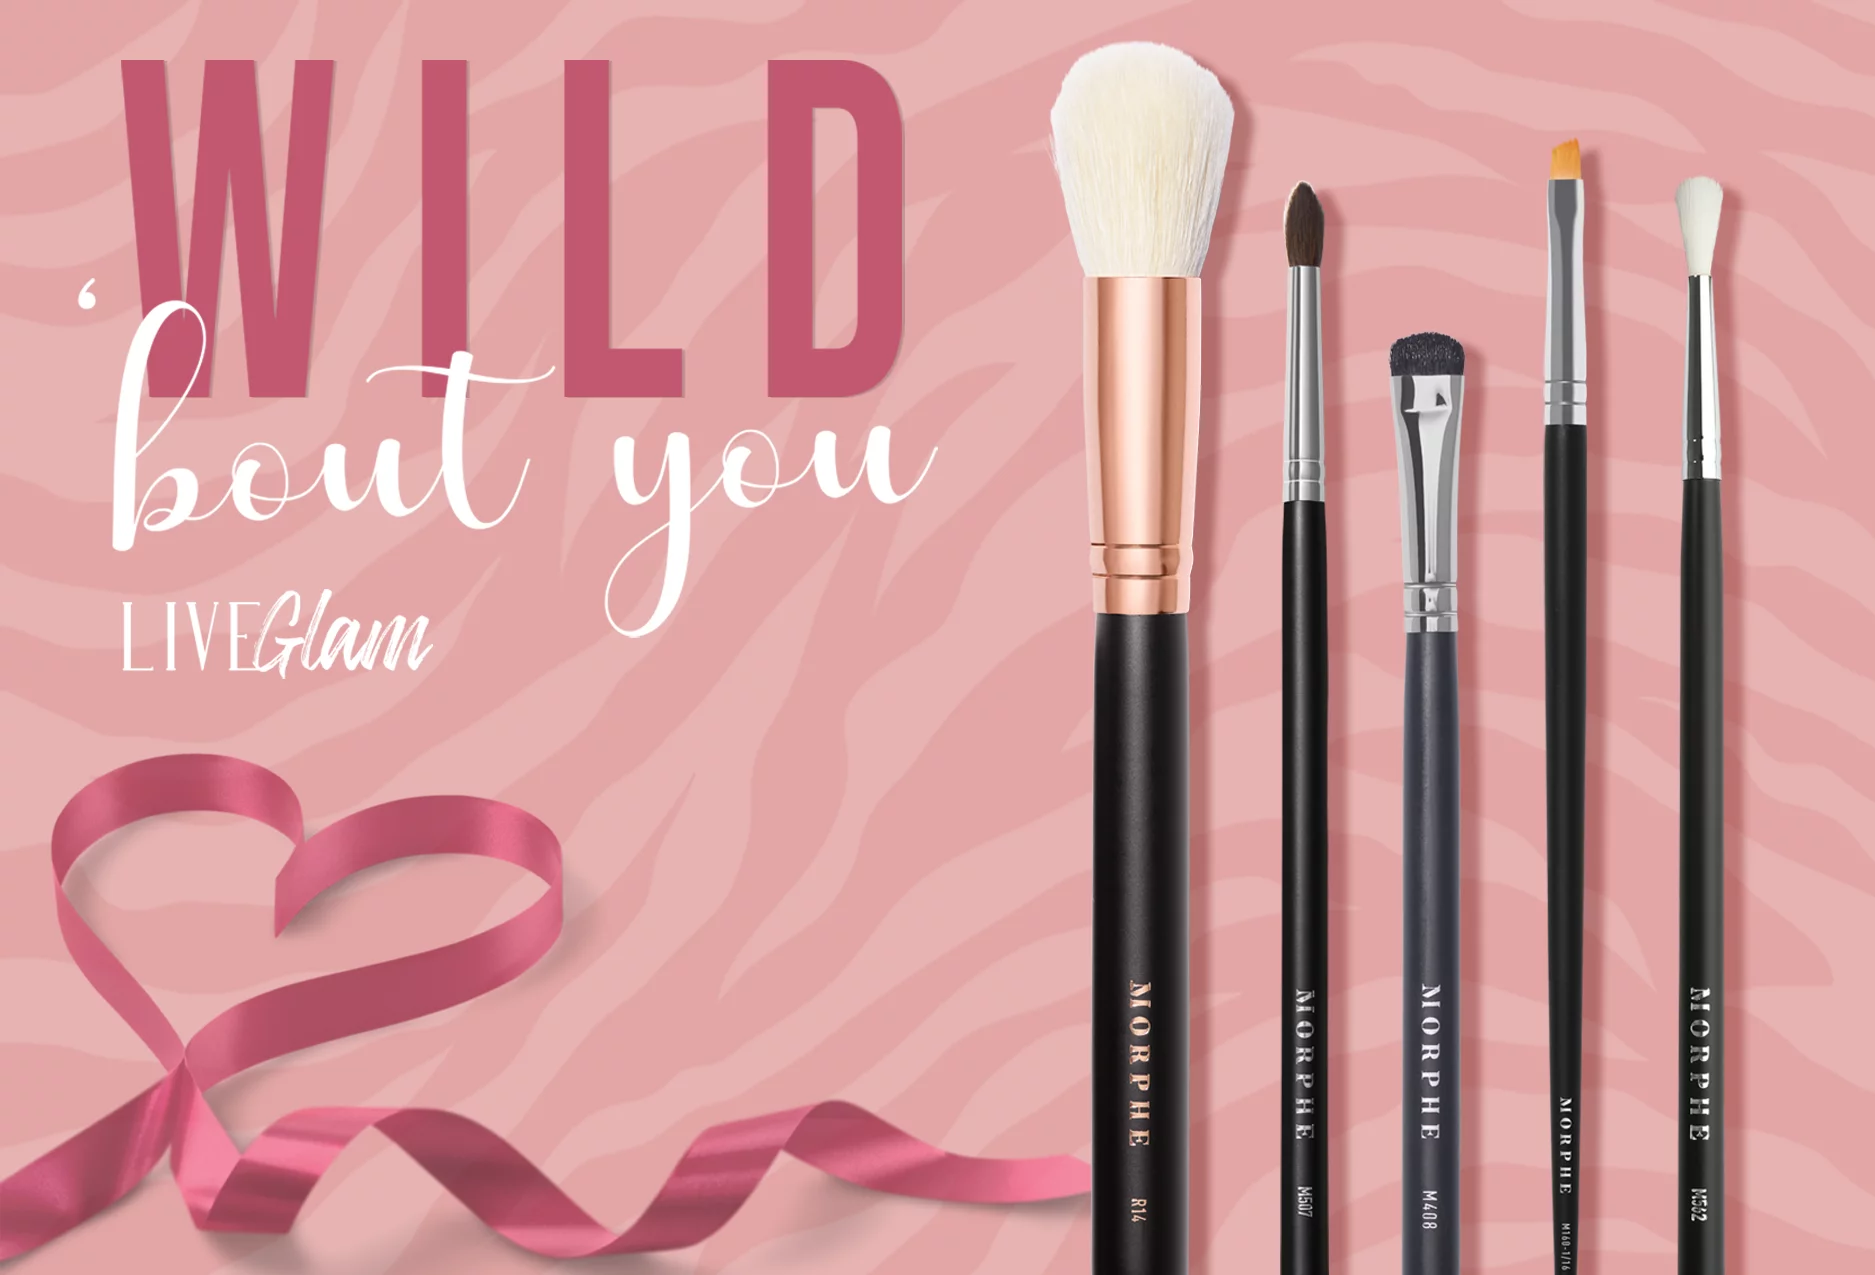 Last Chance To Get February 2021 Brush Club: Wild ‘Bout You